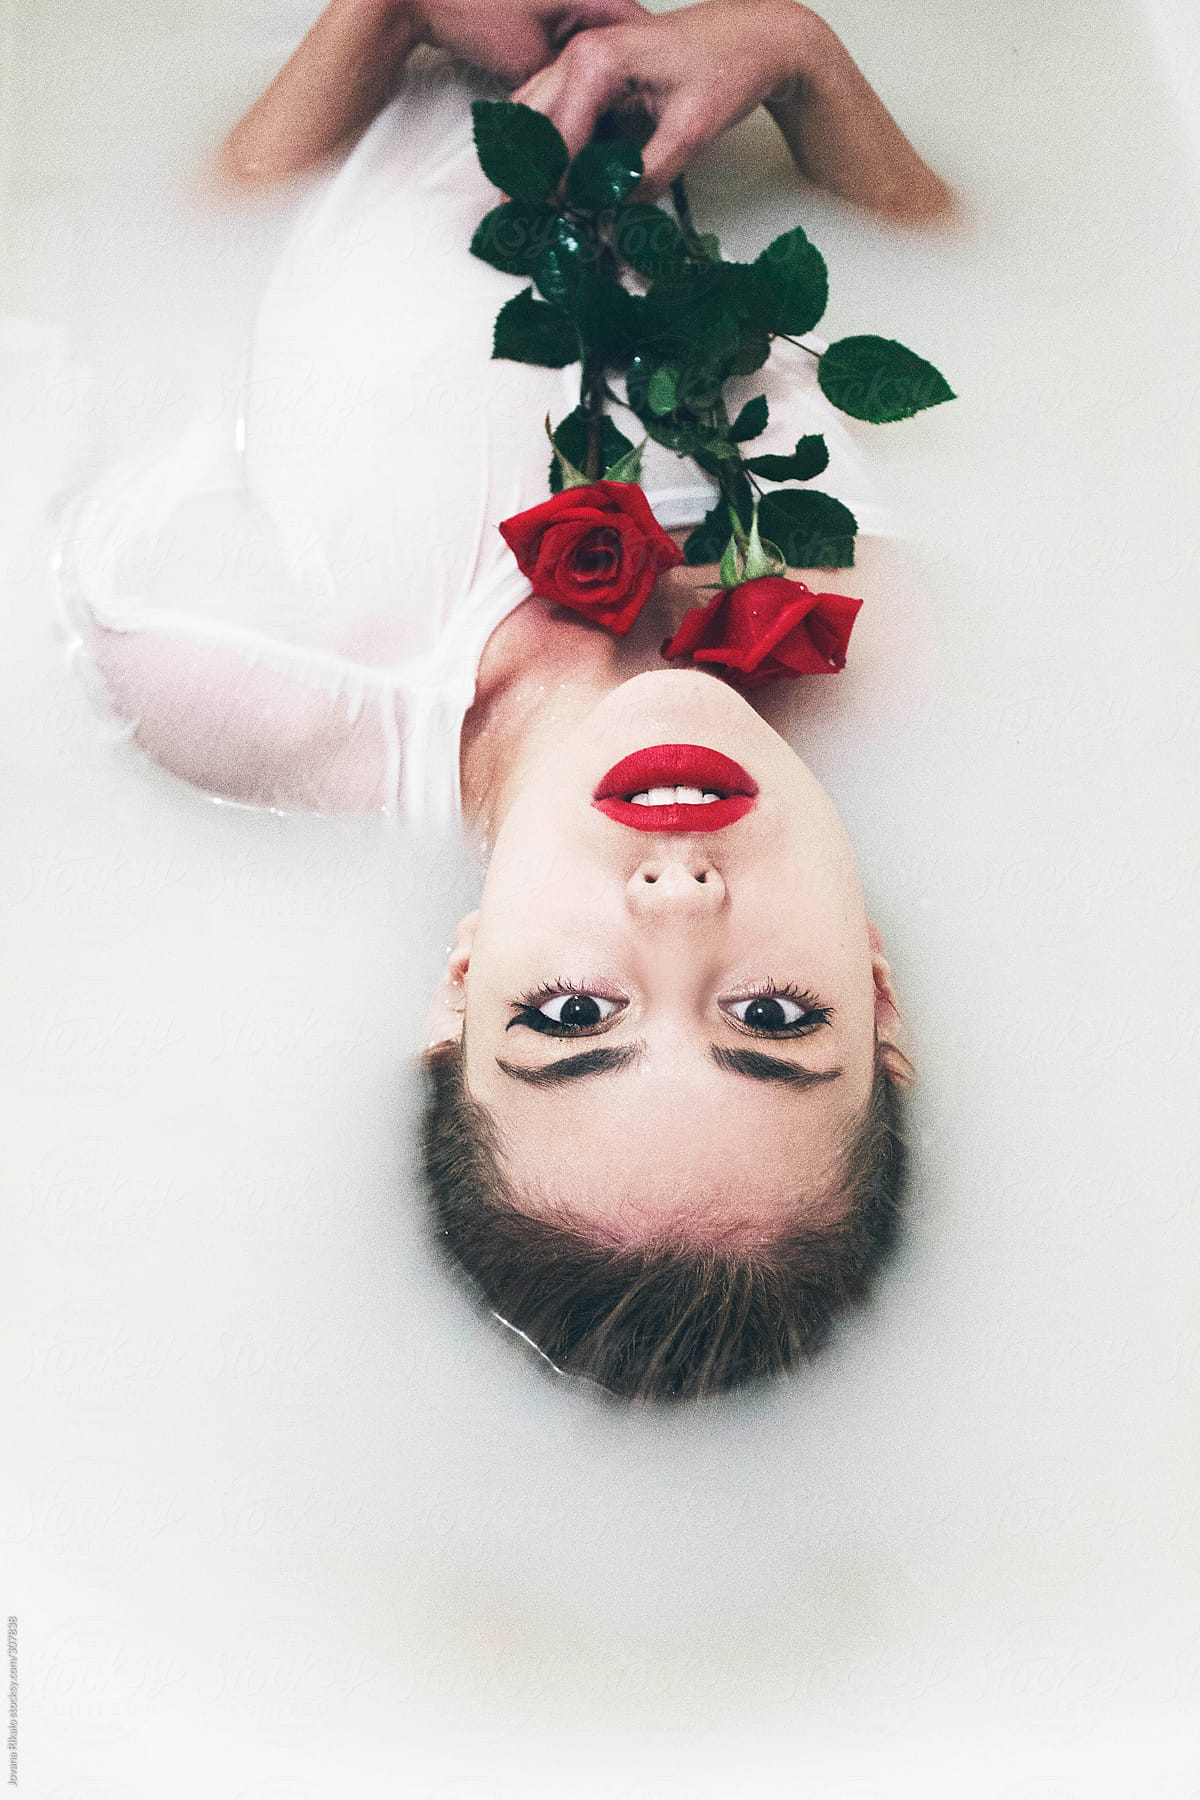 An Attractive Young Woman Lies In Milk Bath By Stocksy Contributor